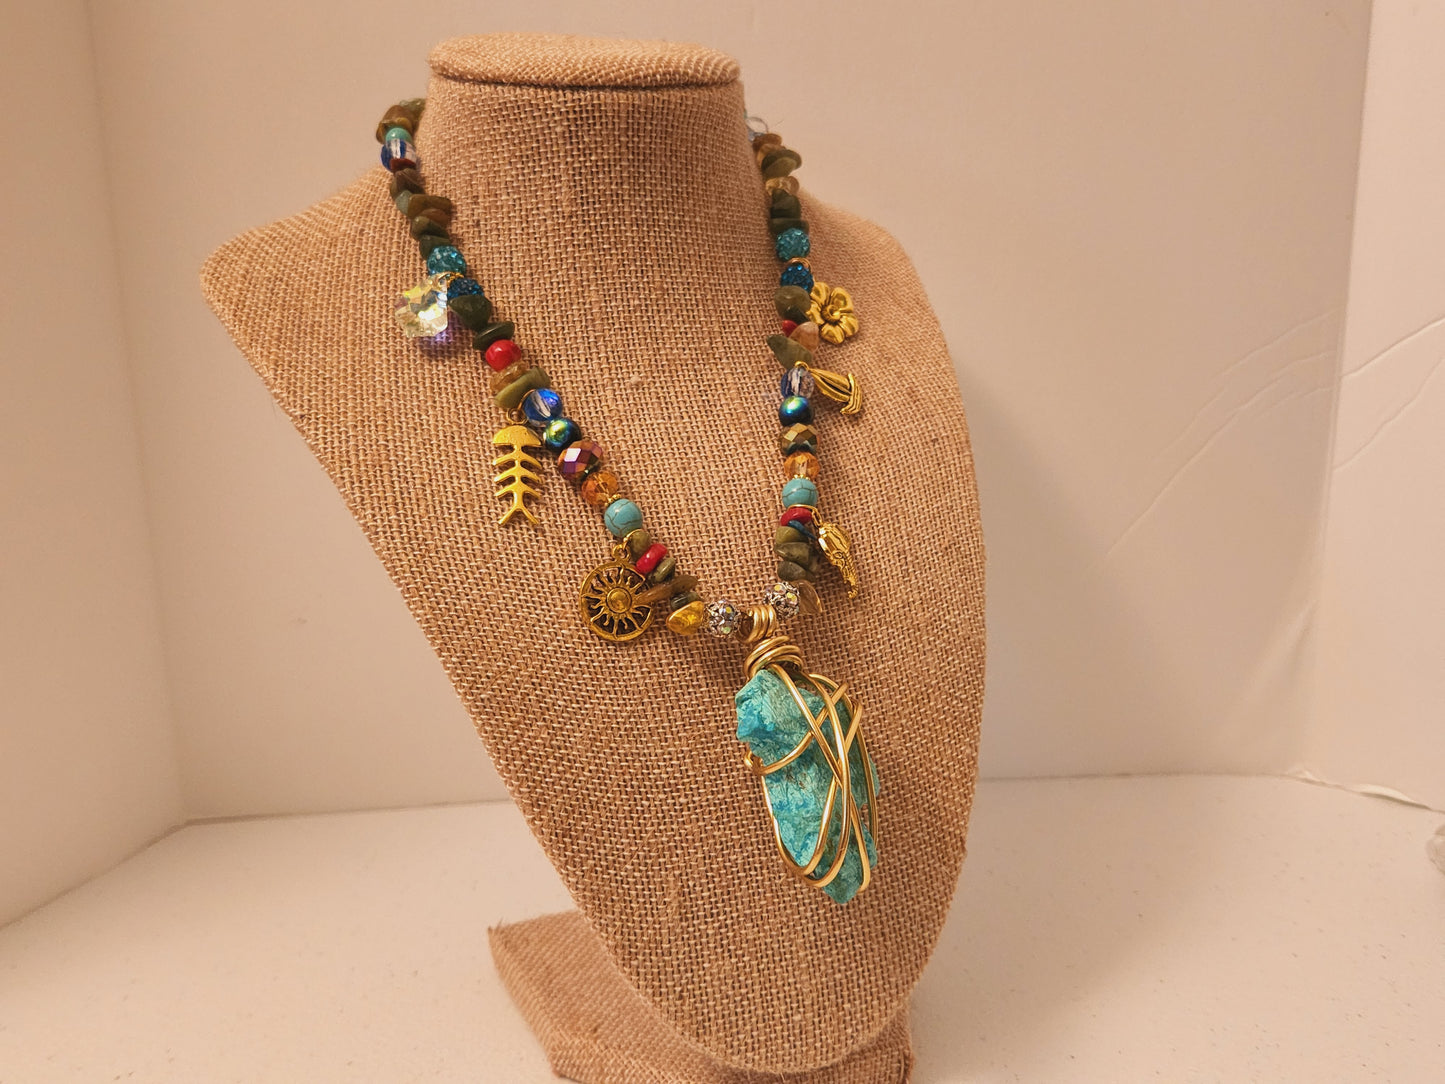 Chrysocolla Necklace with Charms, Wire Wrap Crystal Necklace